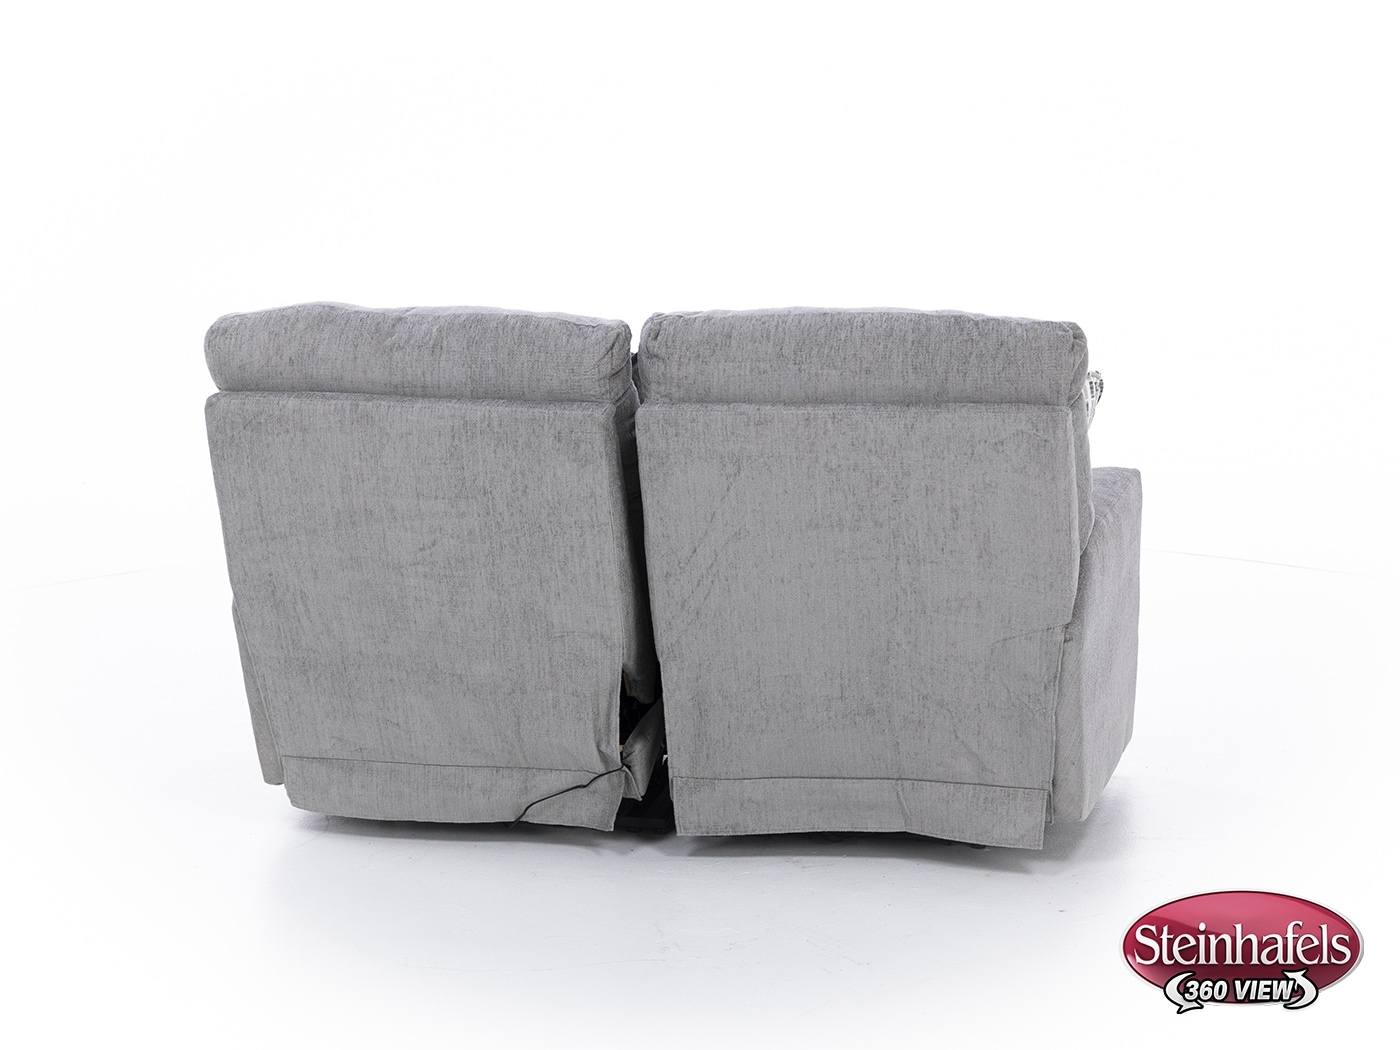 catn grey mtn fab sectional  image pkg  